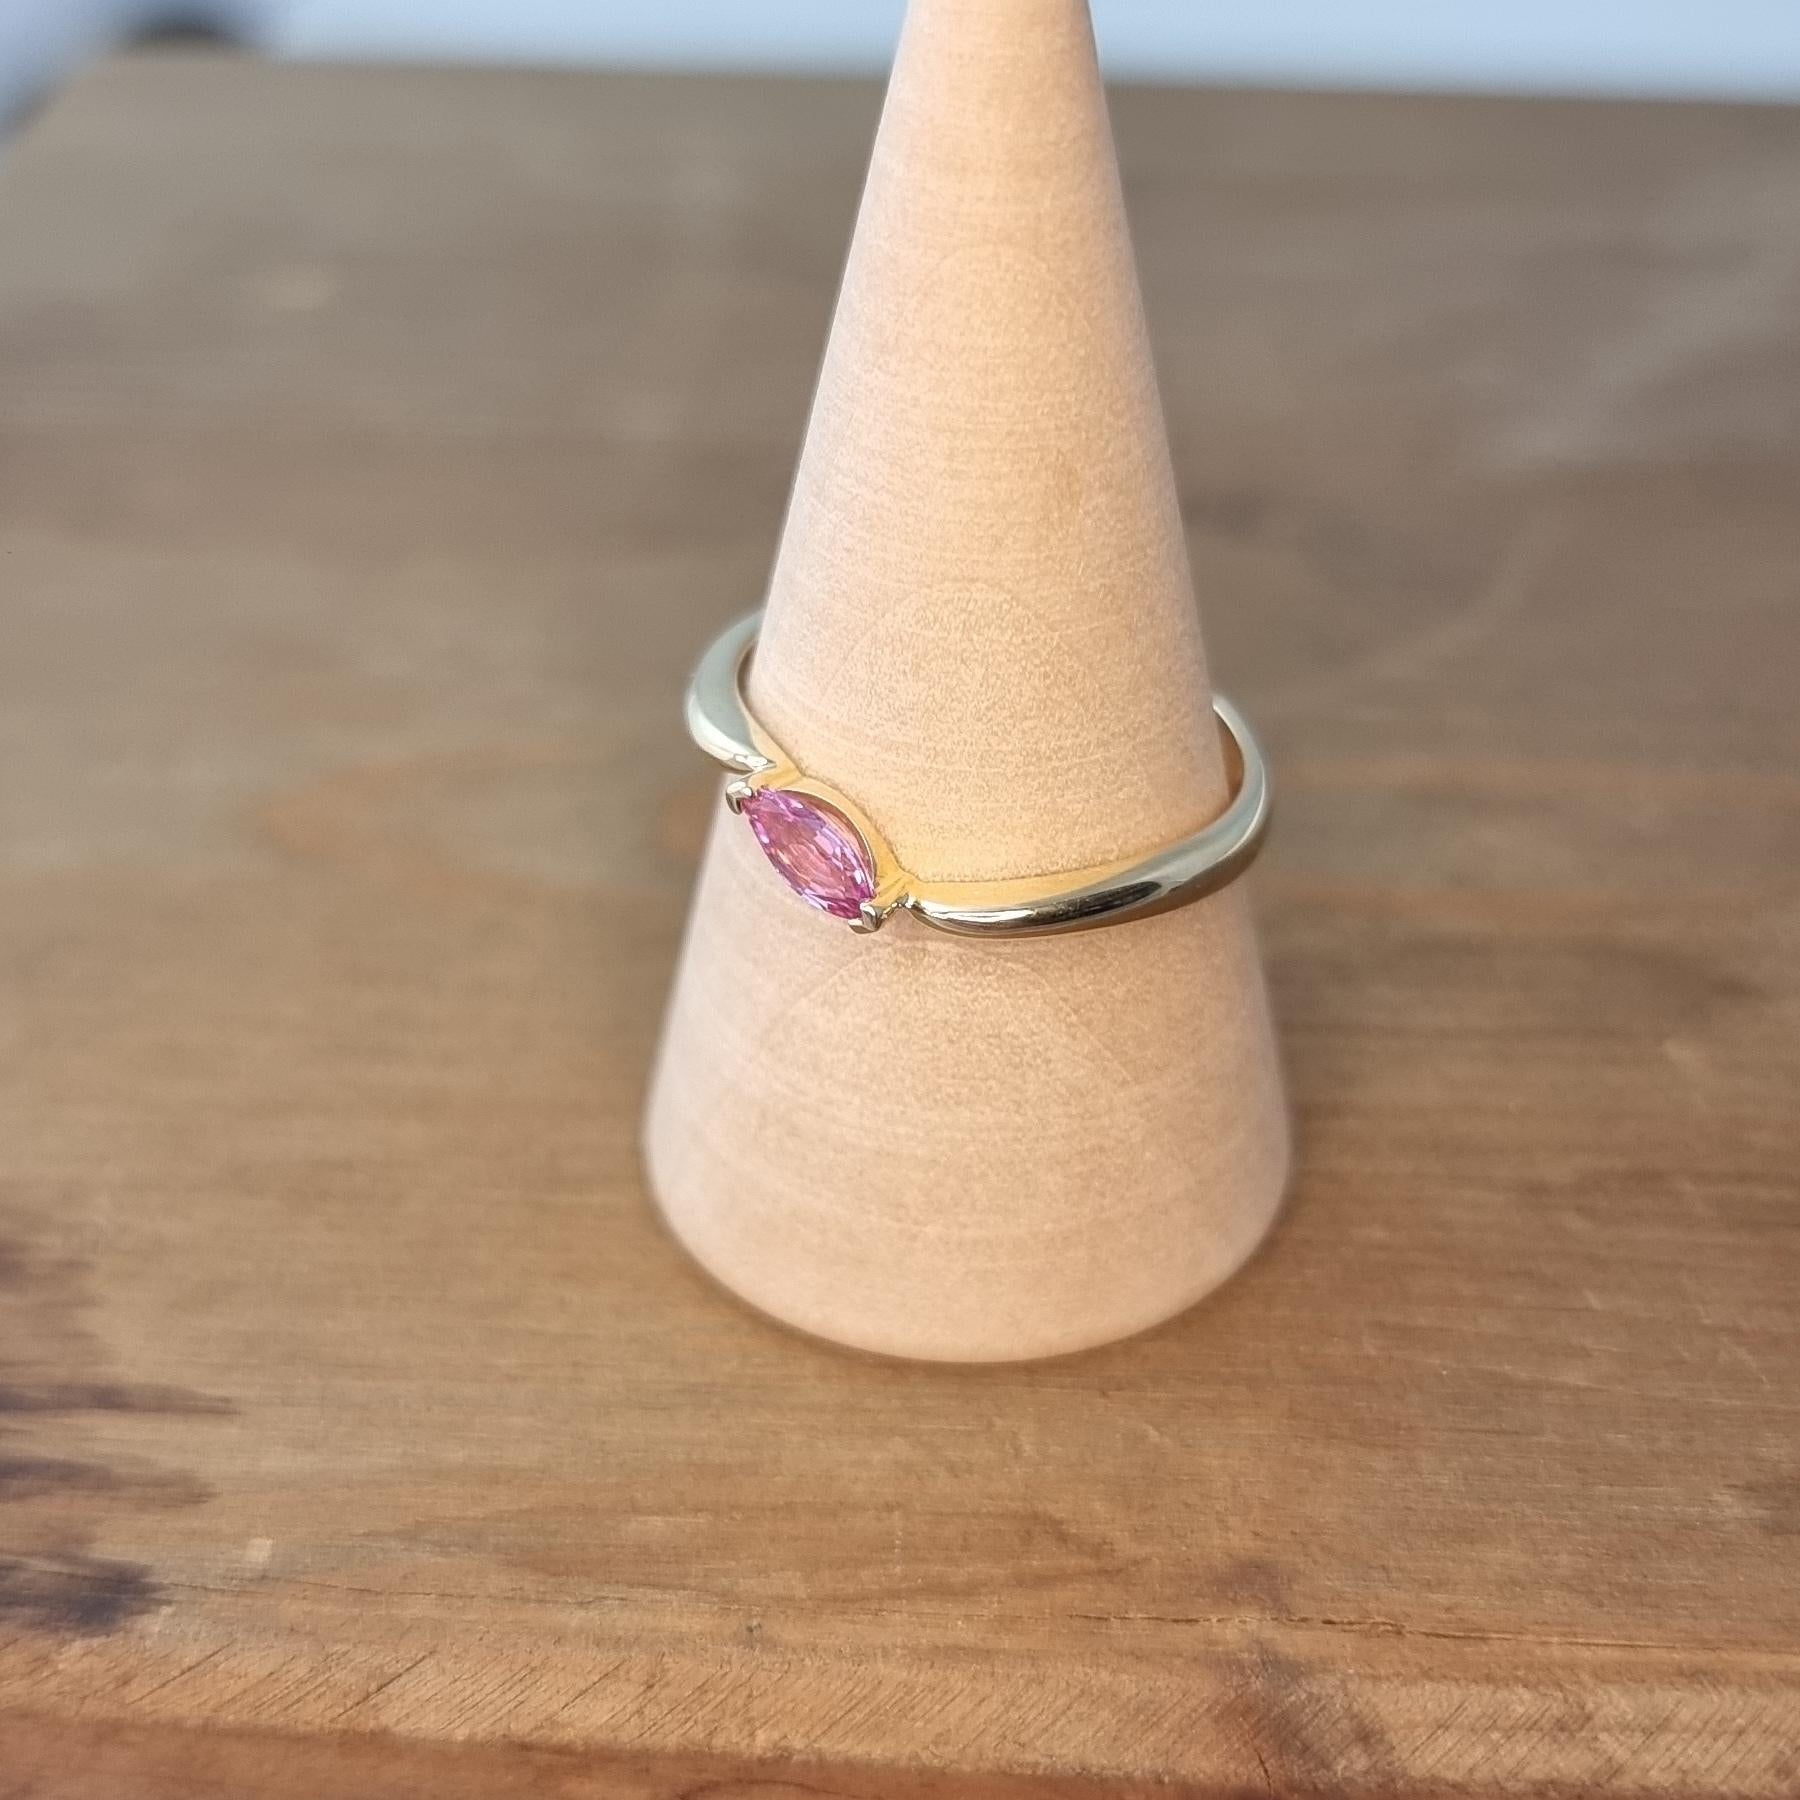 Women's Elegant Yellow Gold Ring with a Single Pink Sapphire in Marquise Cut For Sale